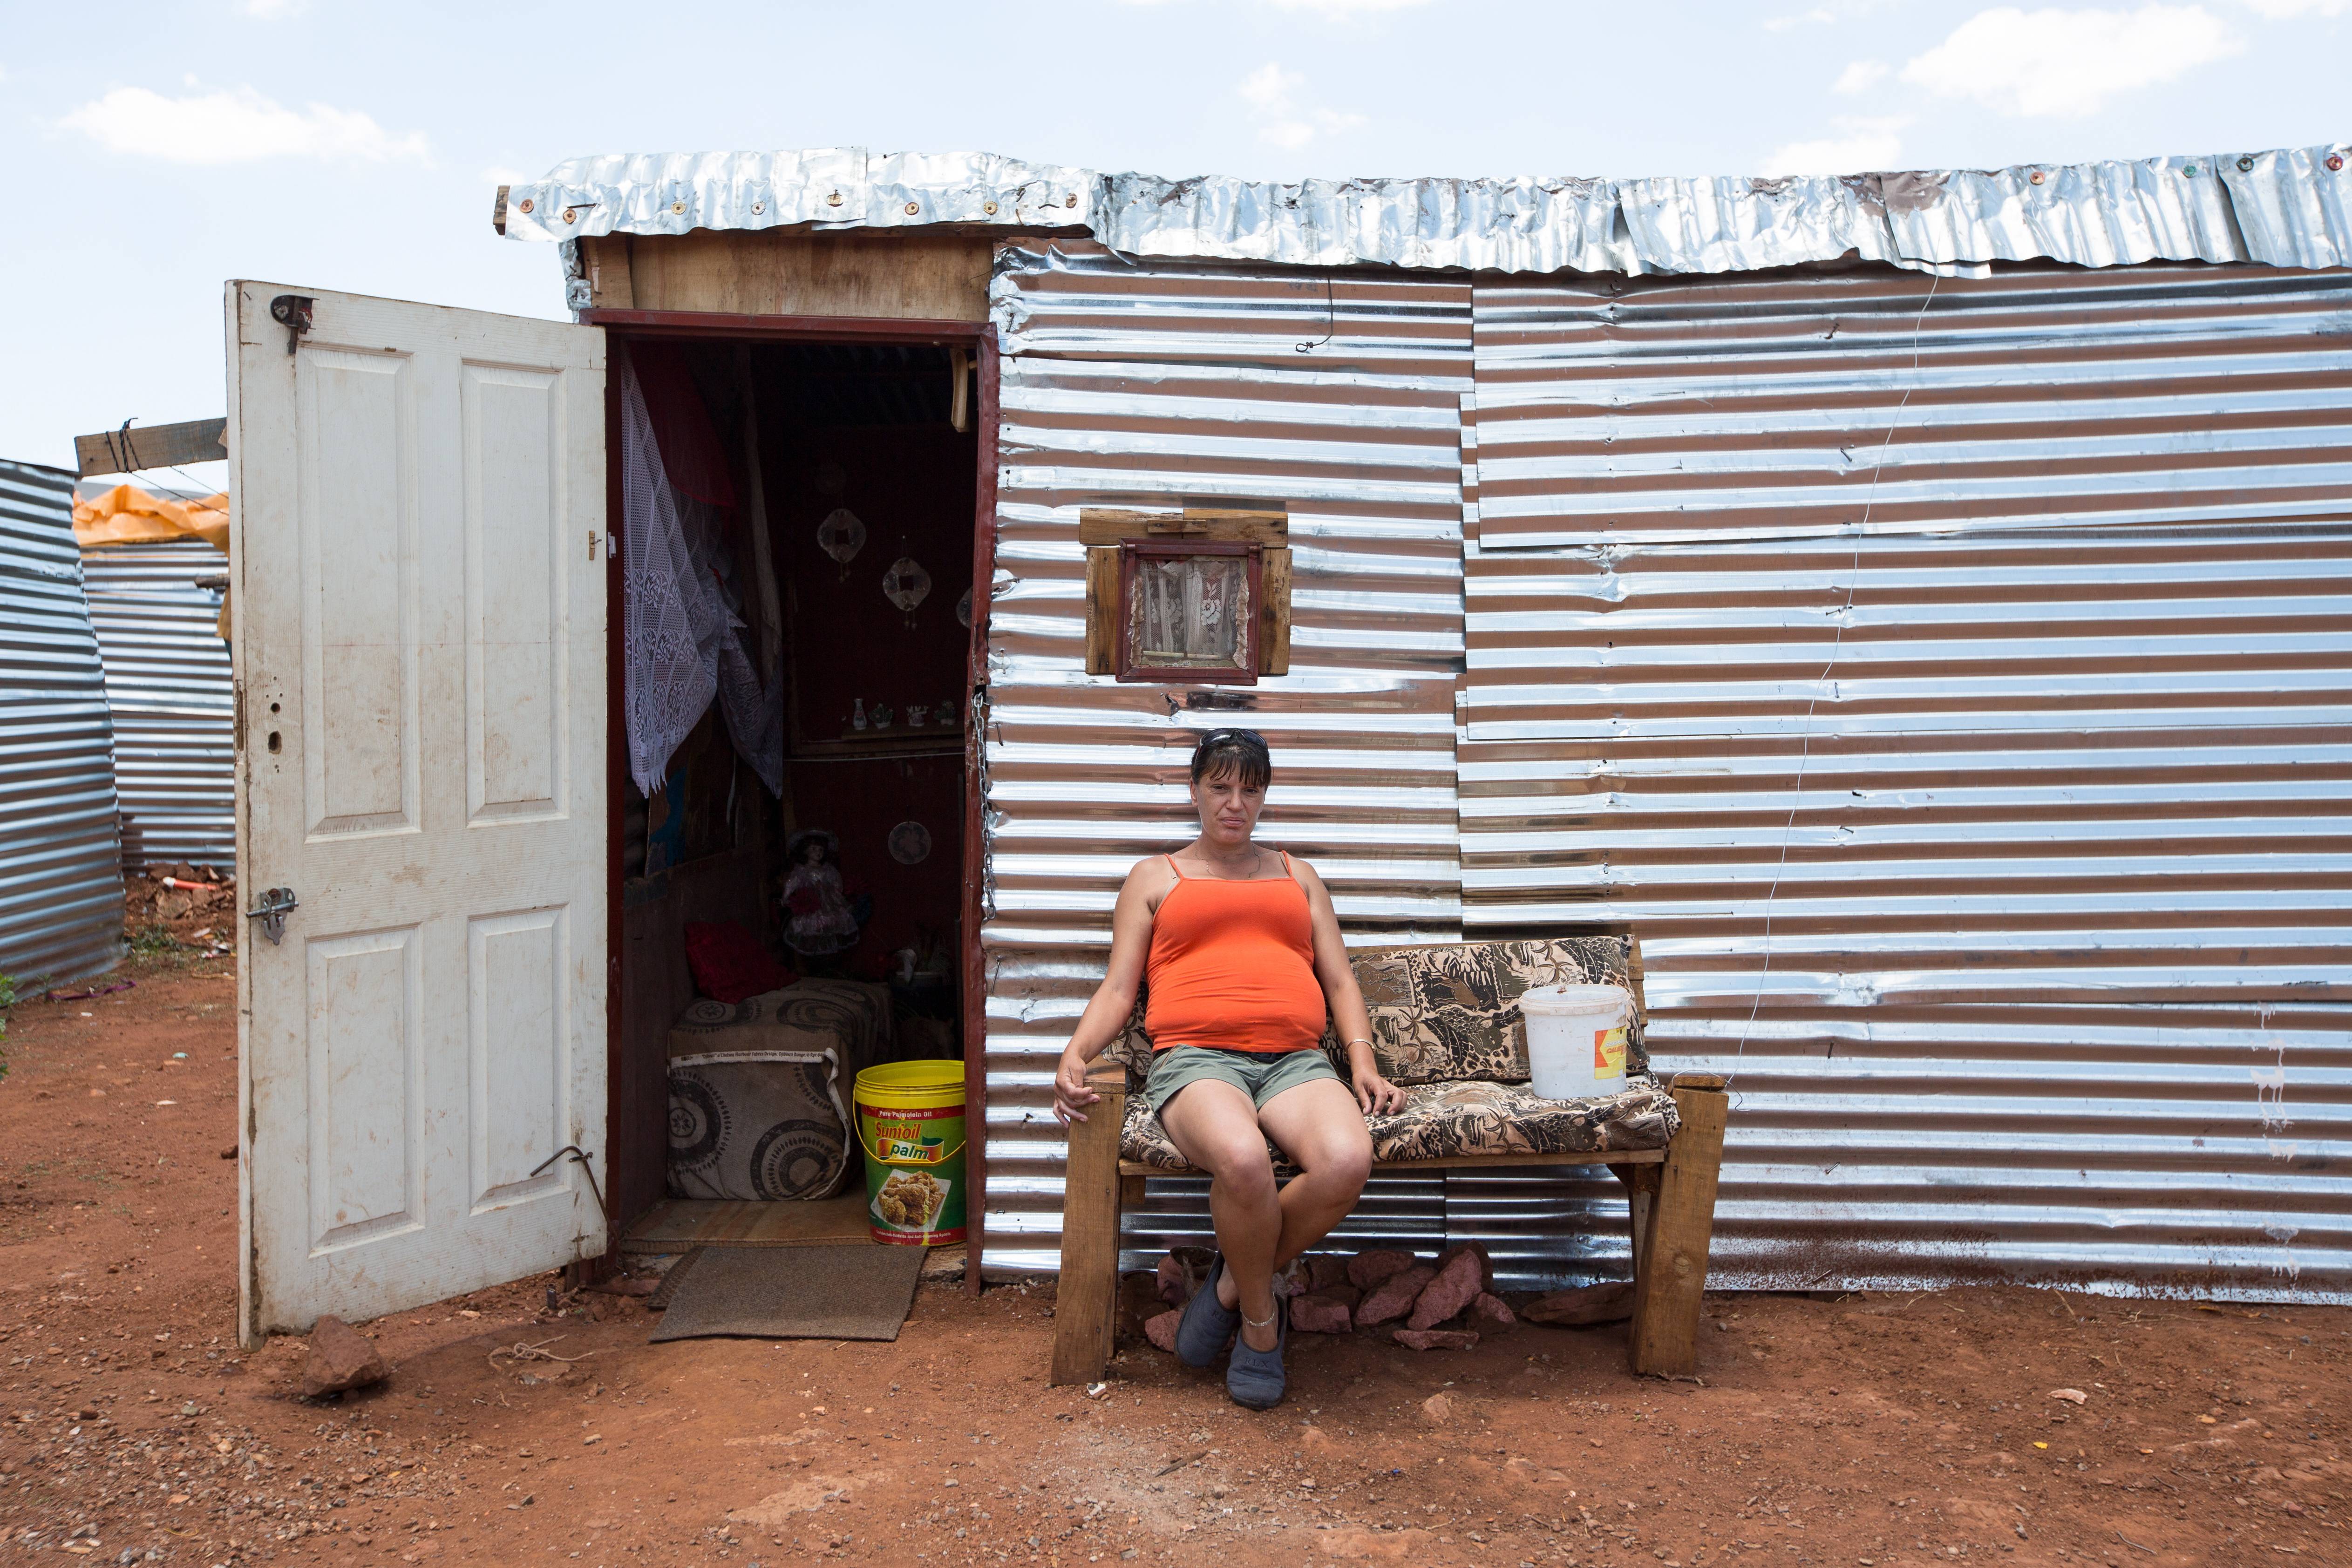 Poor White Woman in South Africa's Shanty Town